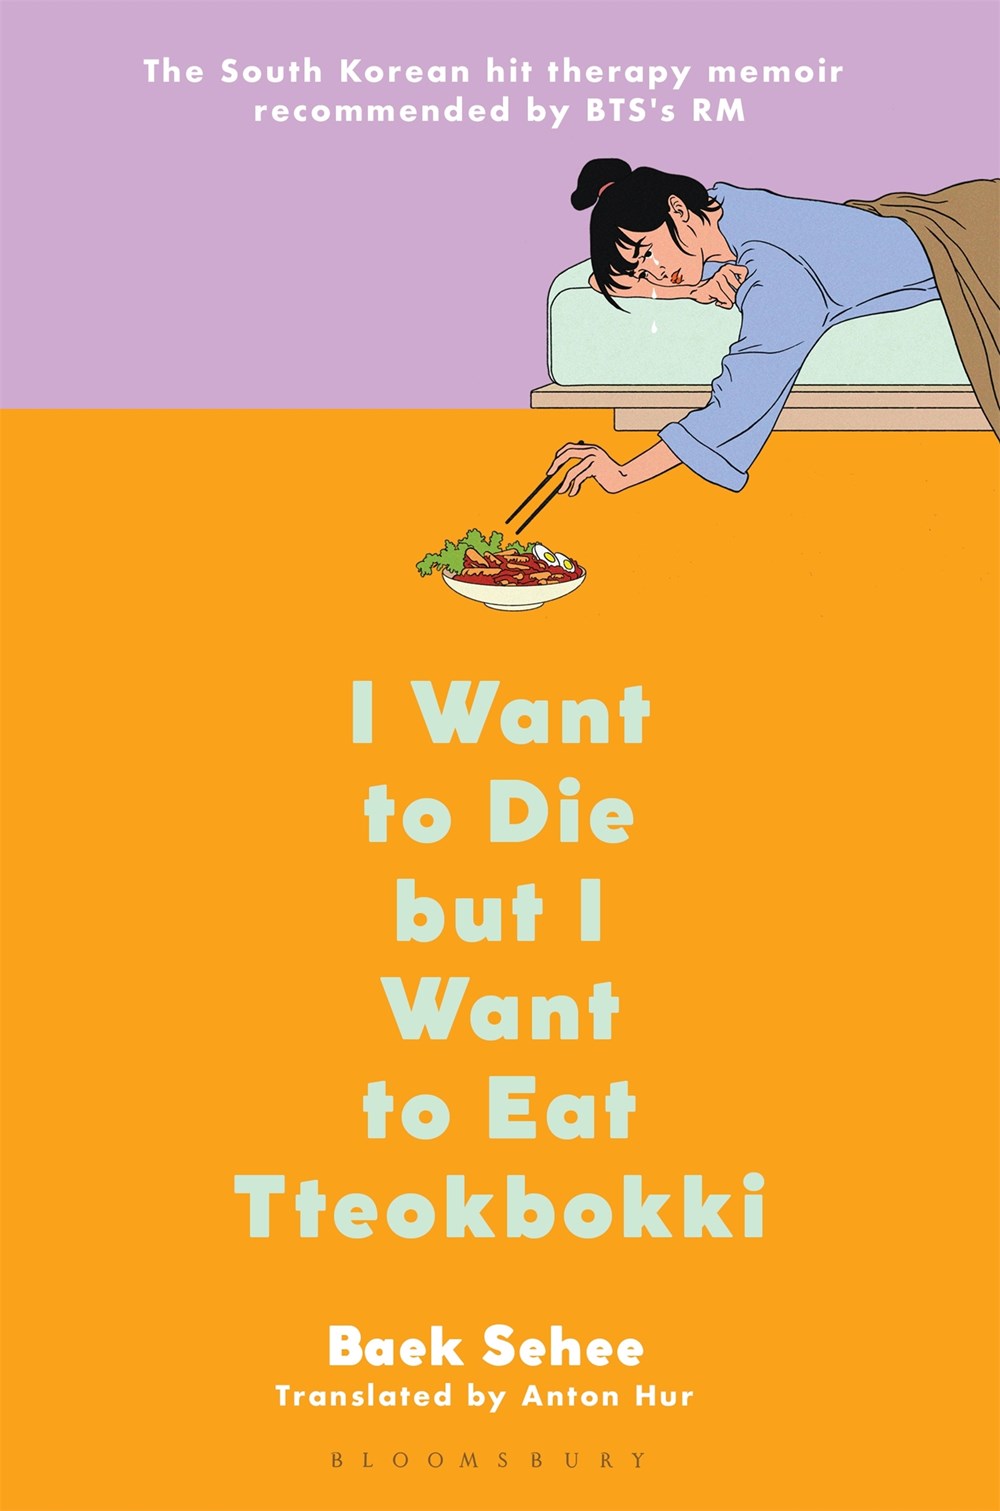 I Want To Die but I Want To Eat Tteokbokki: A Memoir